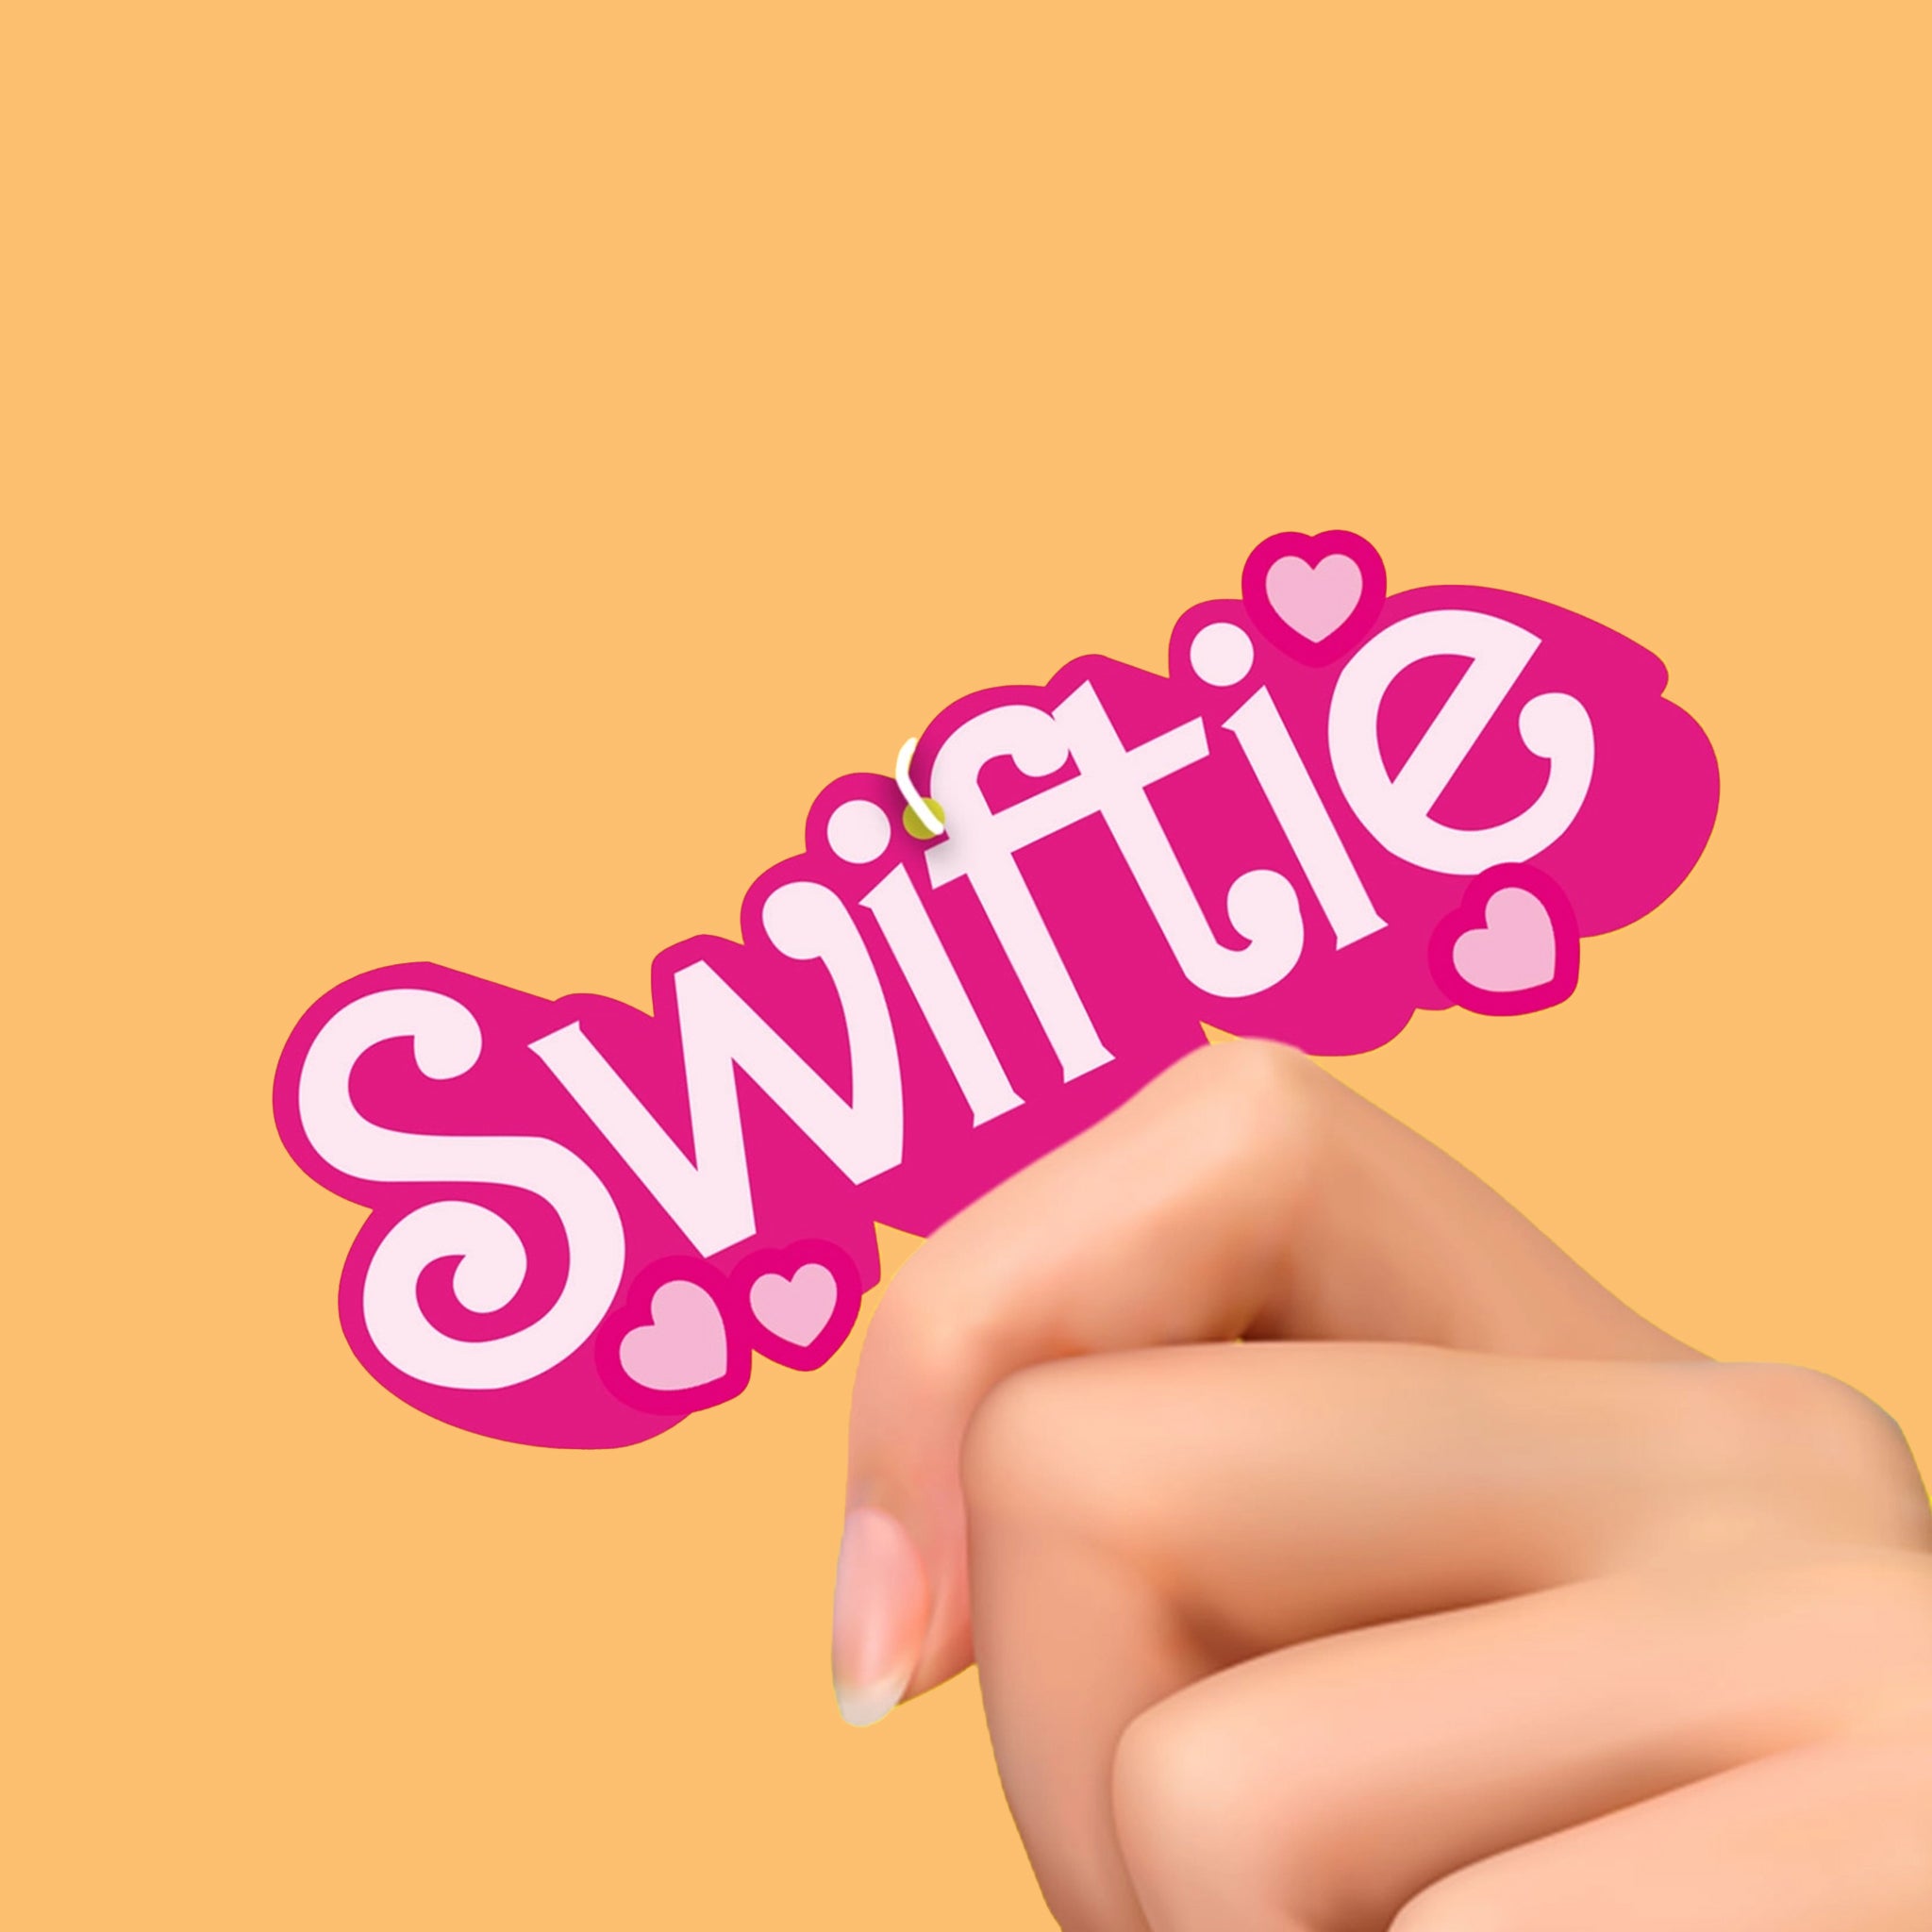 A pink and white air freshener out of its plastic packaging that reads, "Swiftie".